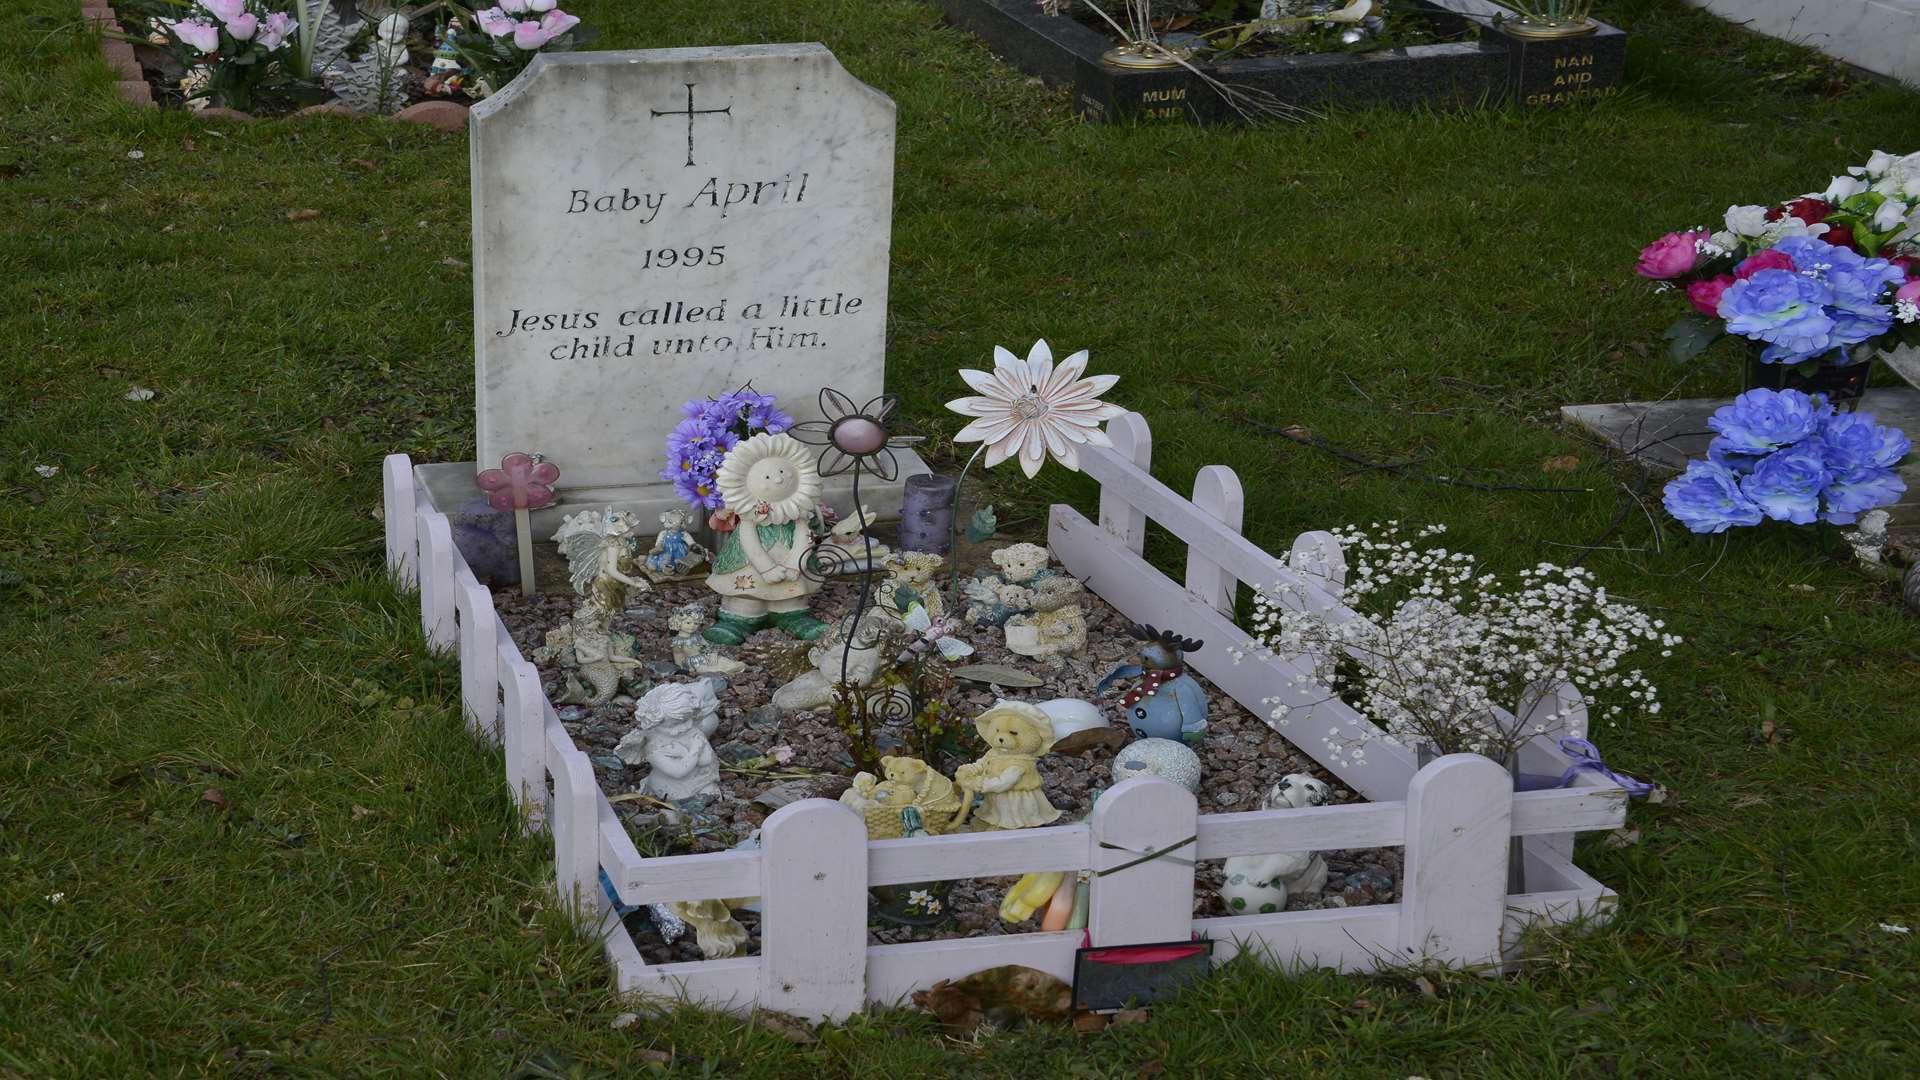 The grave of Baby April in Ashford Bybrook cemetery